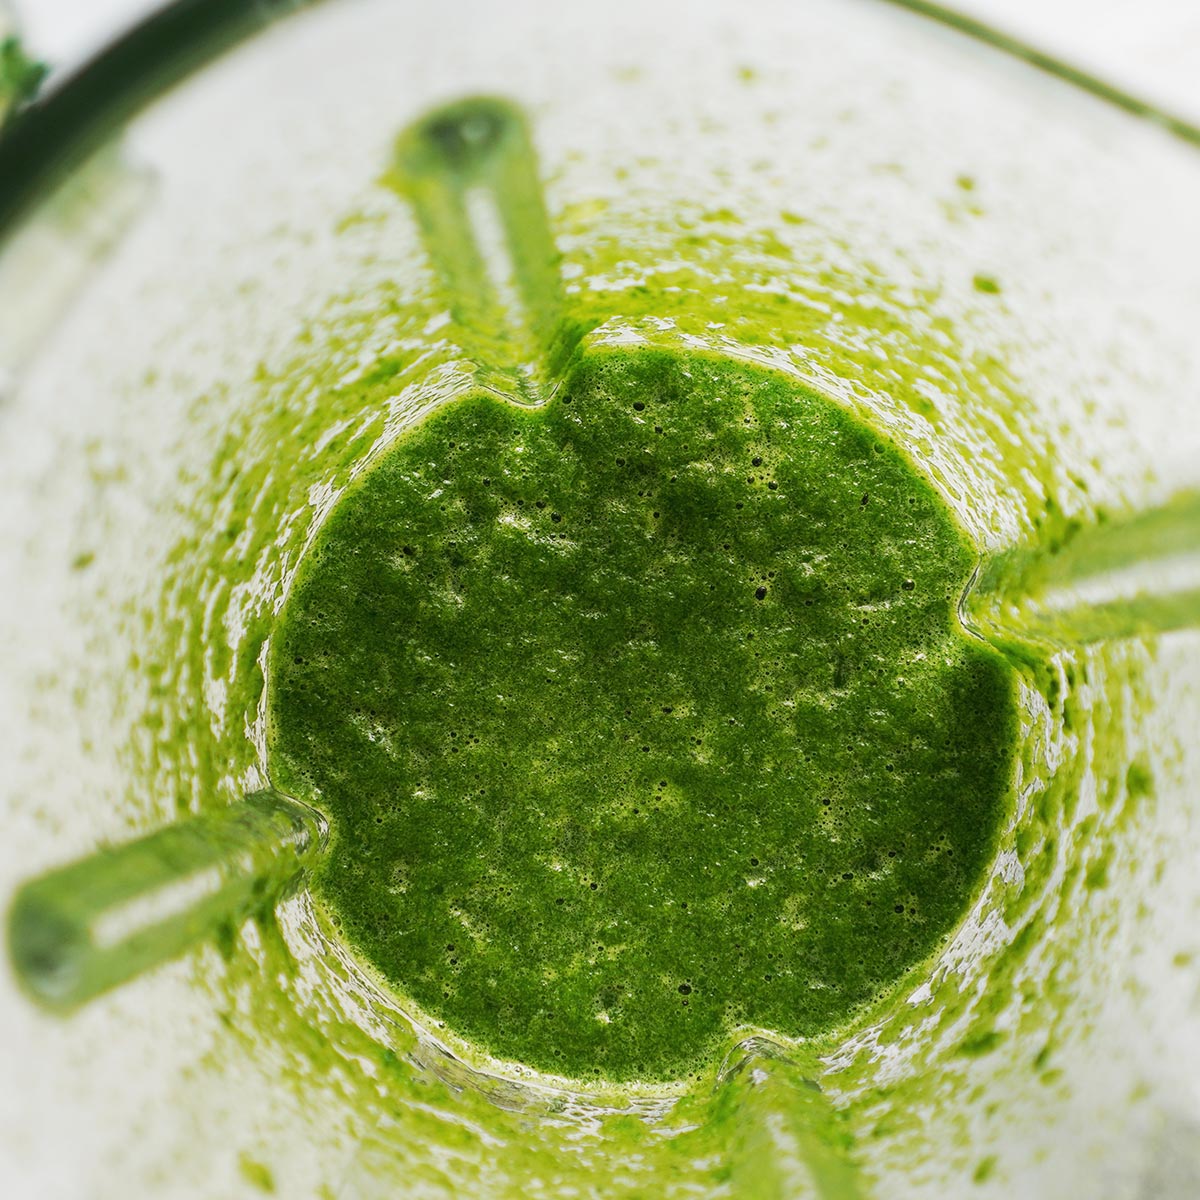 A blender's glass with the green sauce made of poblano peppers, cilantro and spinach.